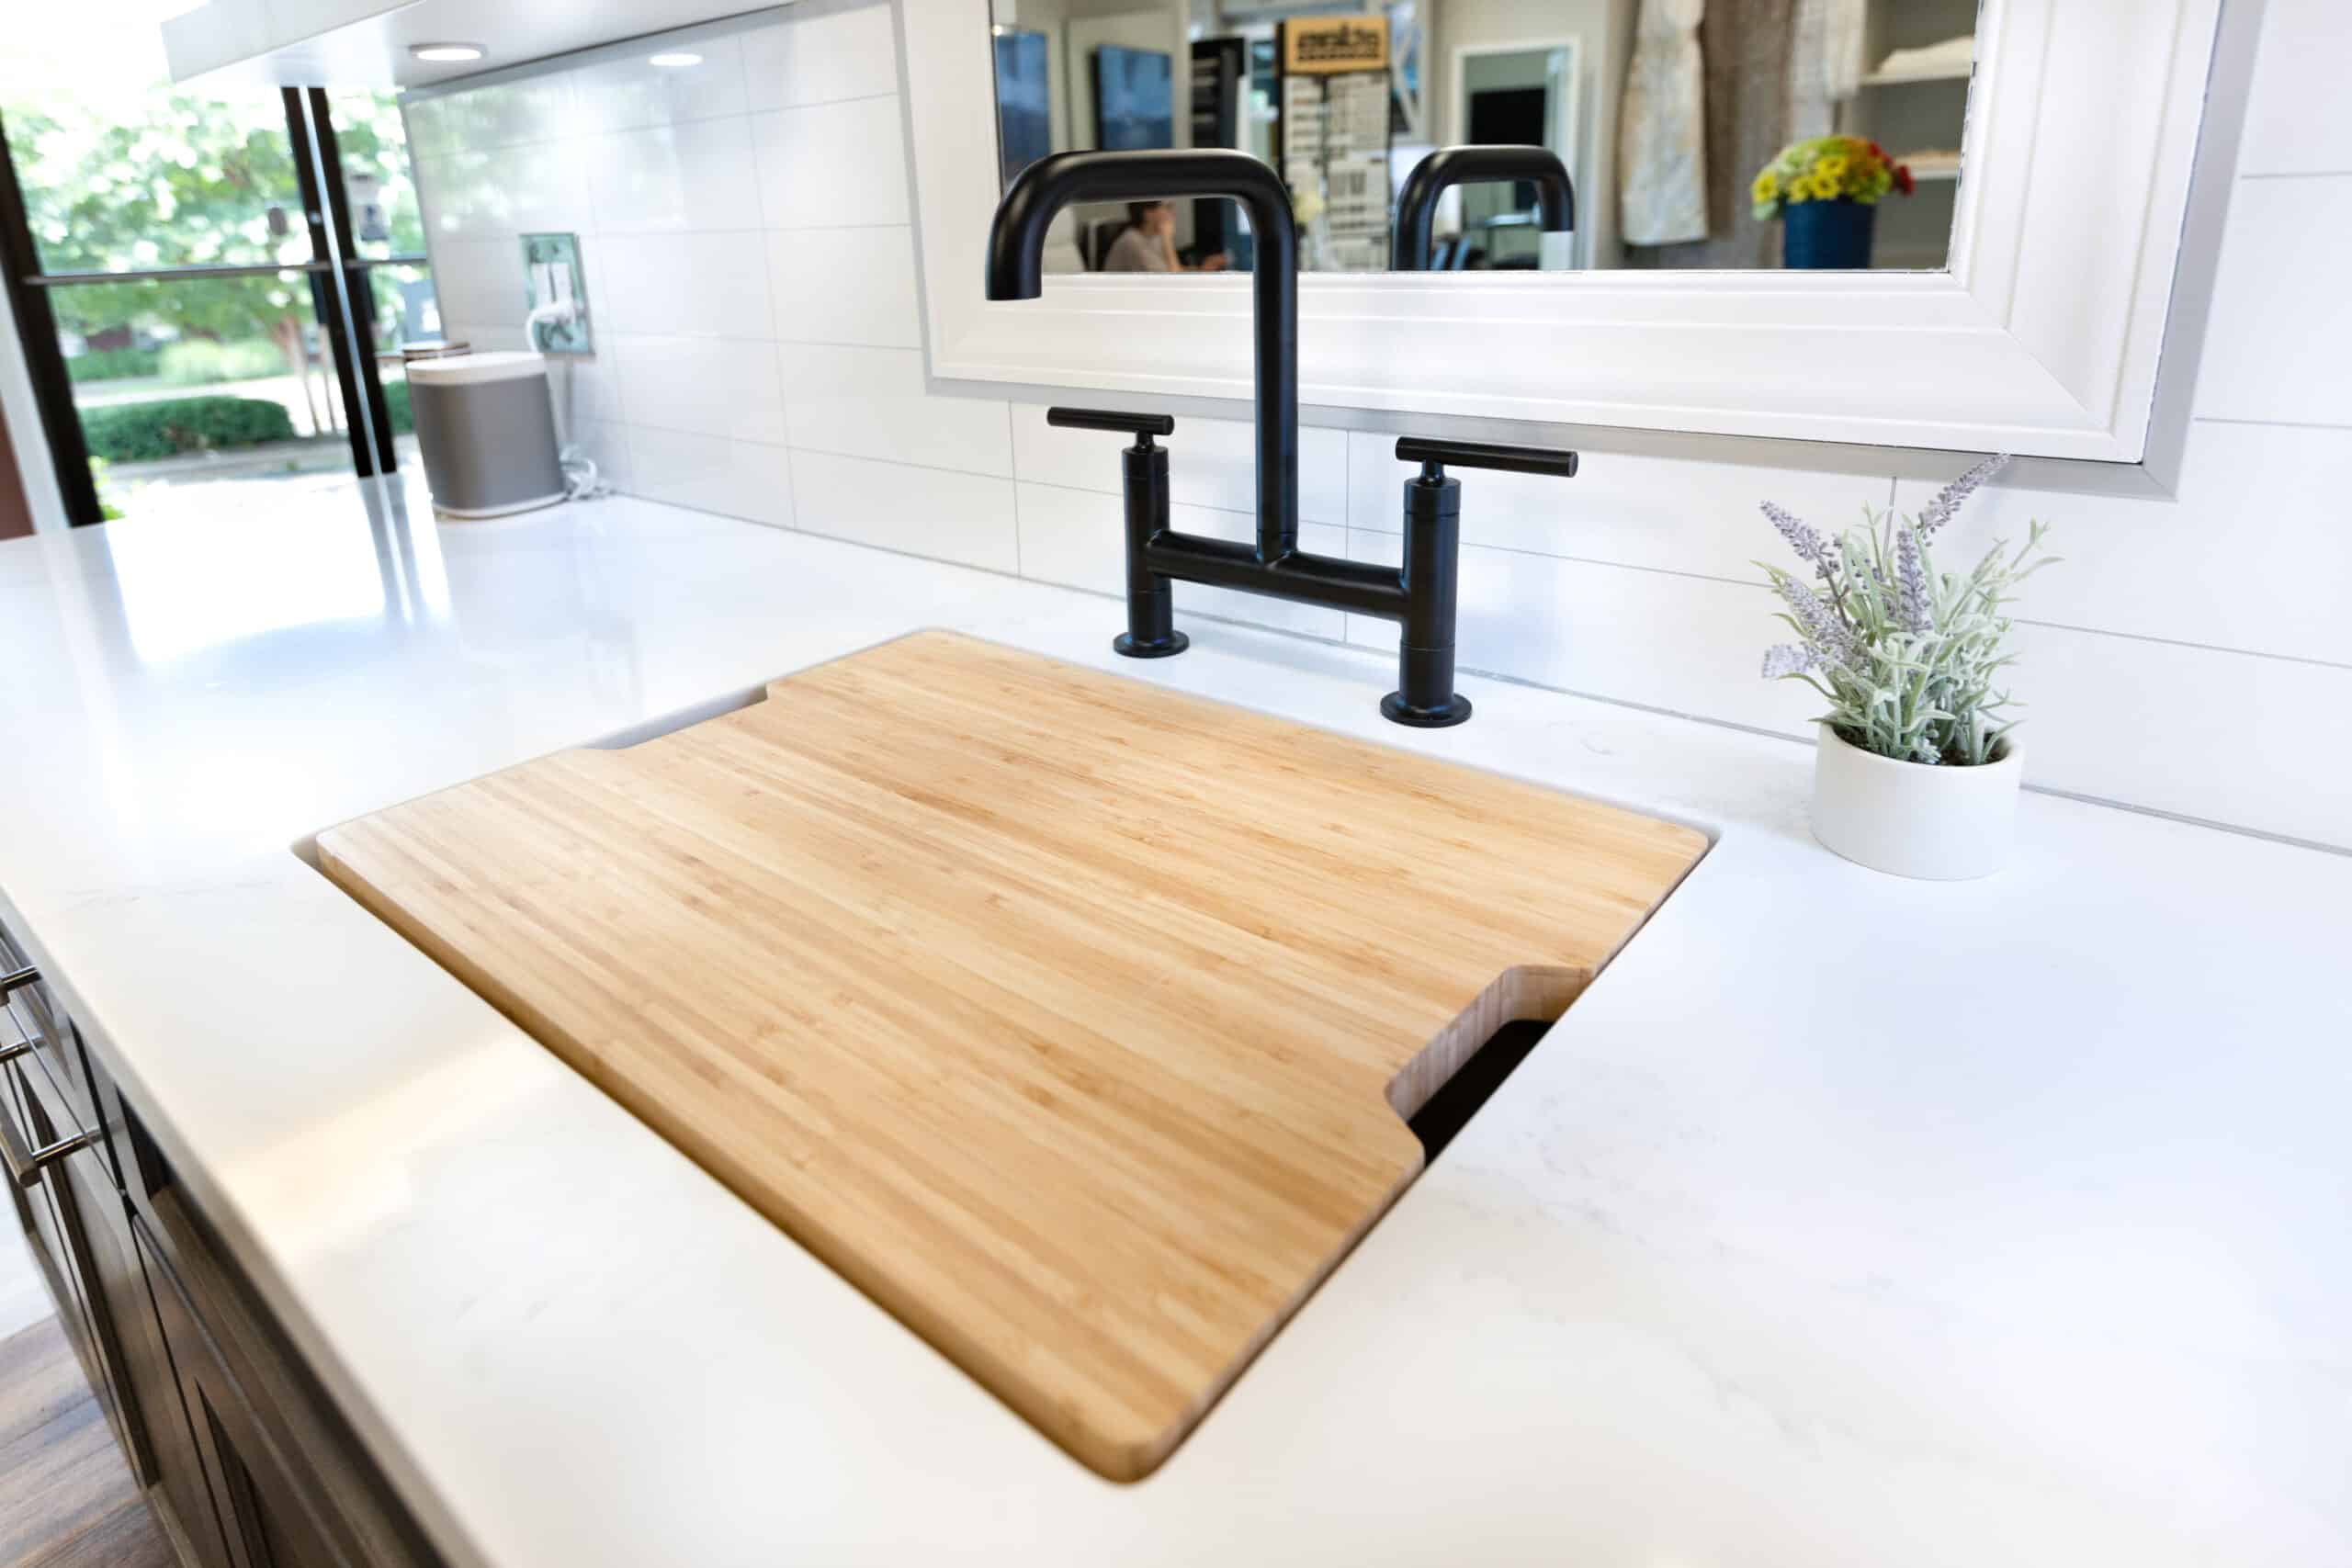 A kitchen sink with a wooden cutting board on it